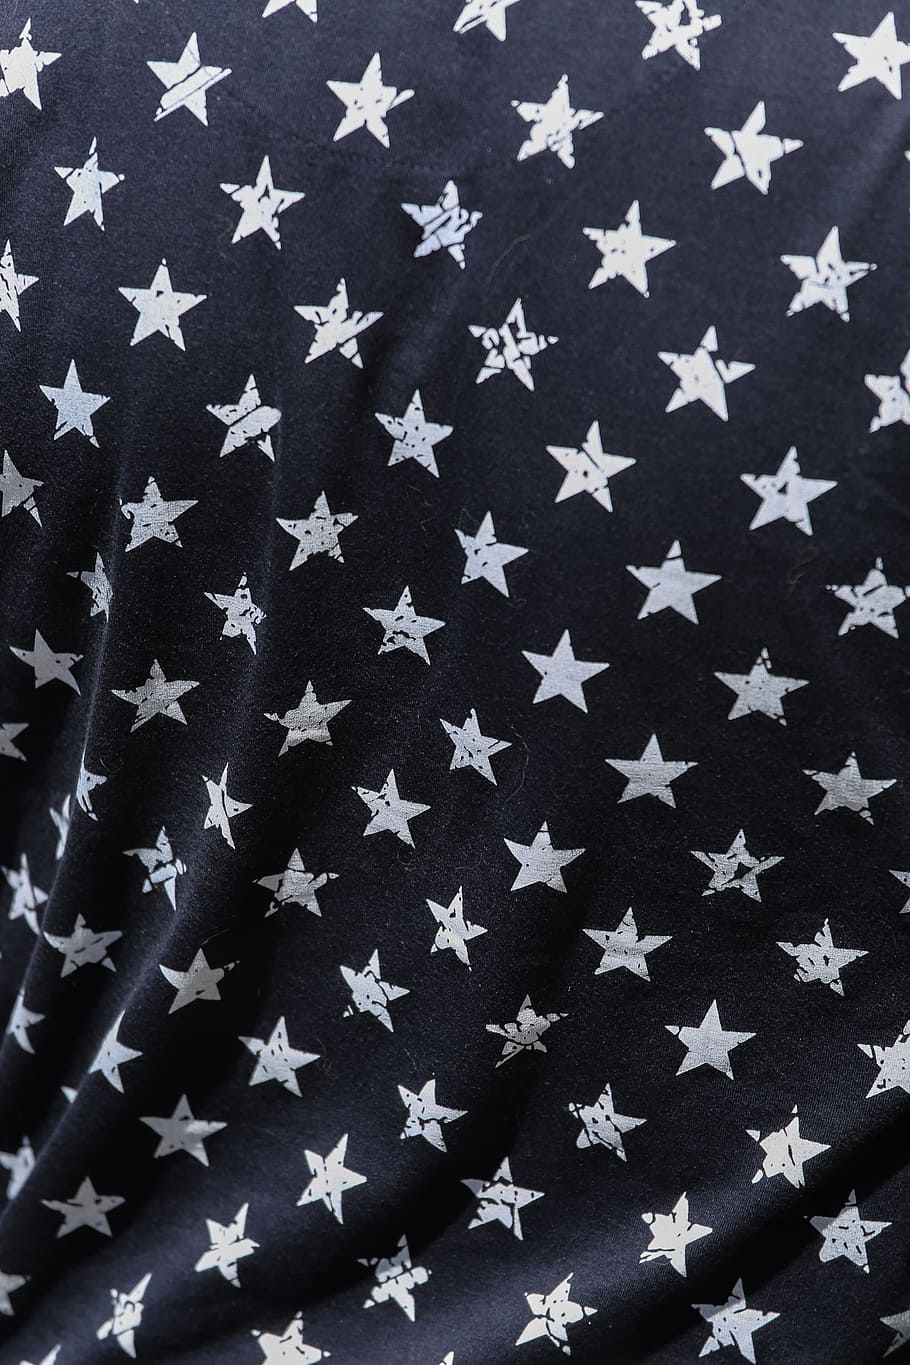 blue, fabric, white, stars, printed, 4th of july, american flag, celebration, clothing, cowboy